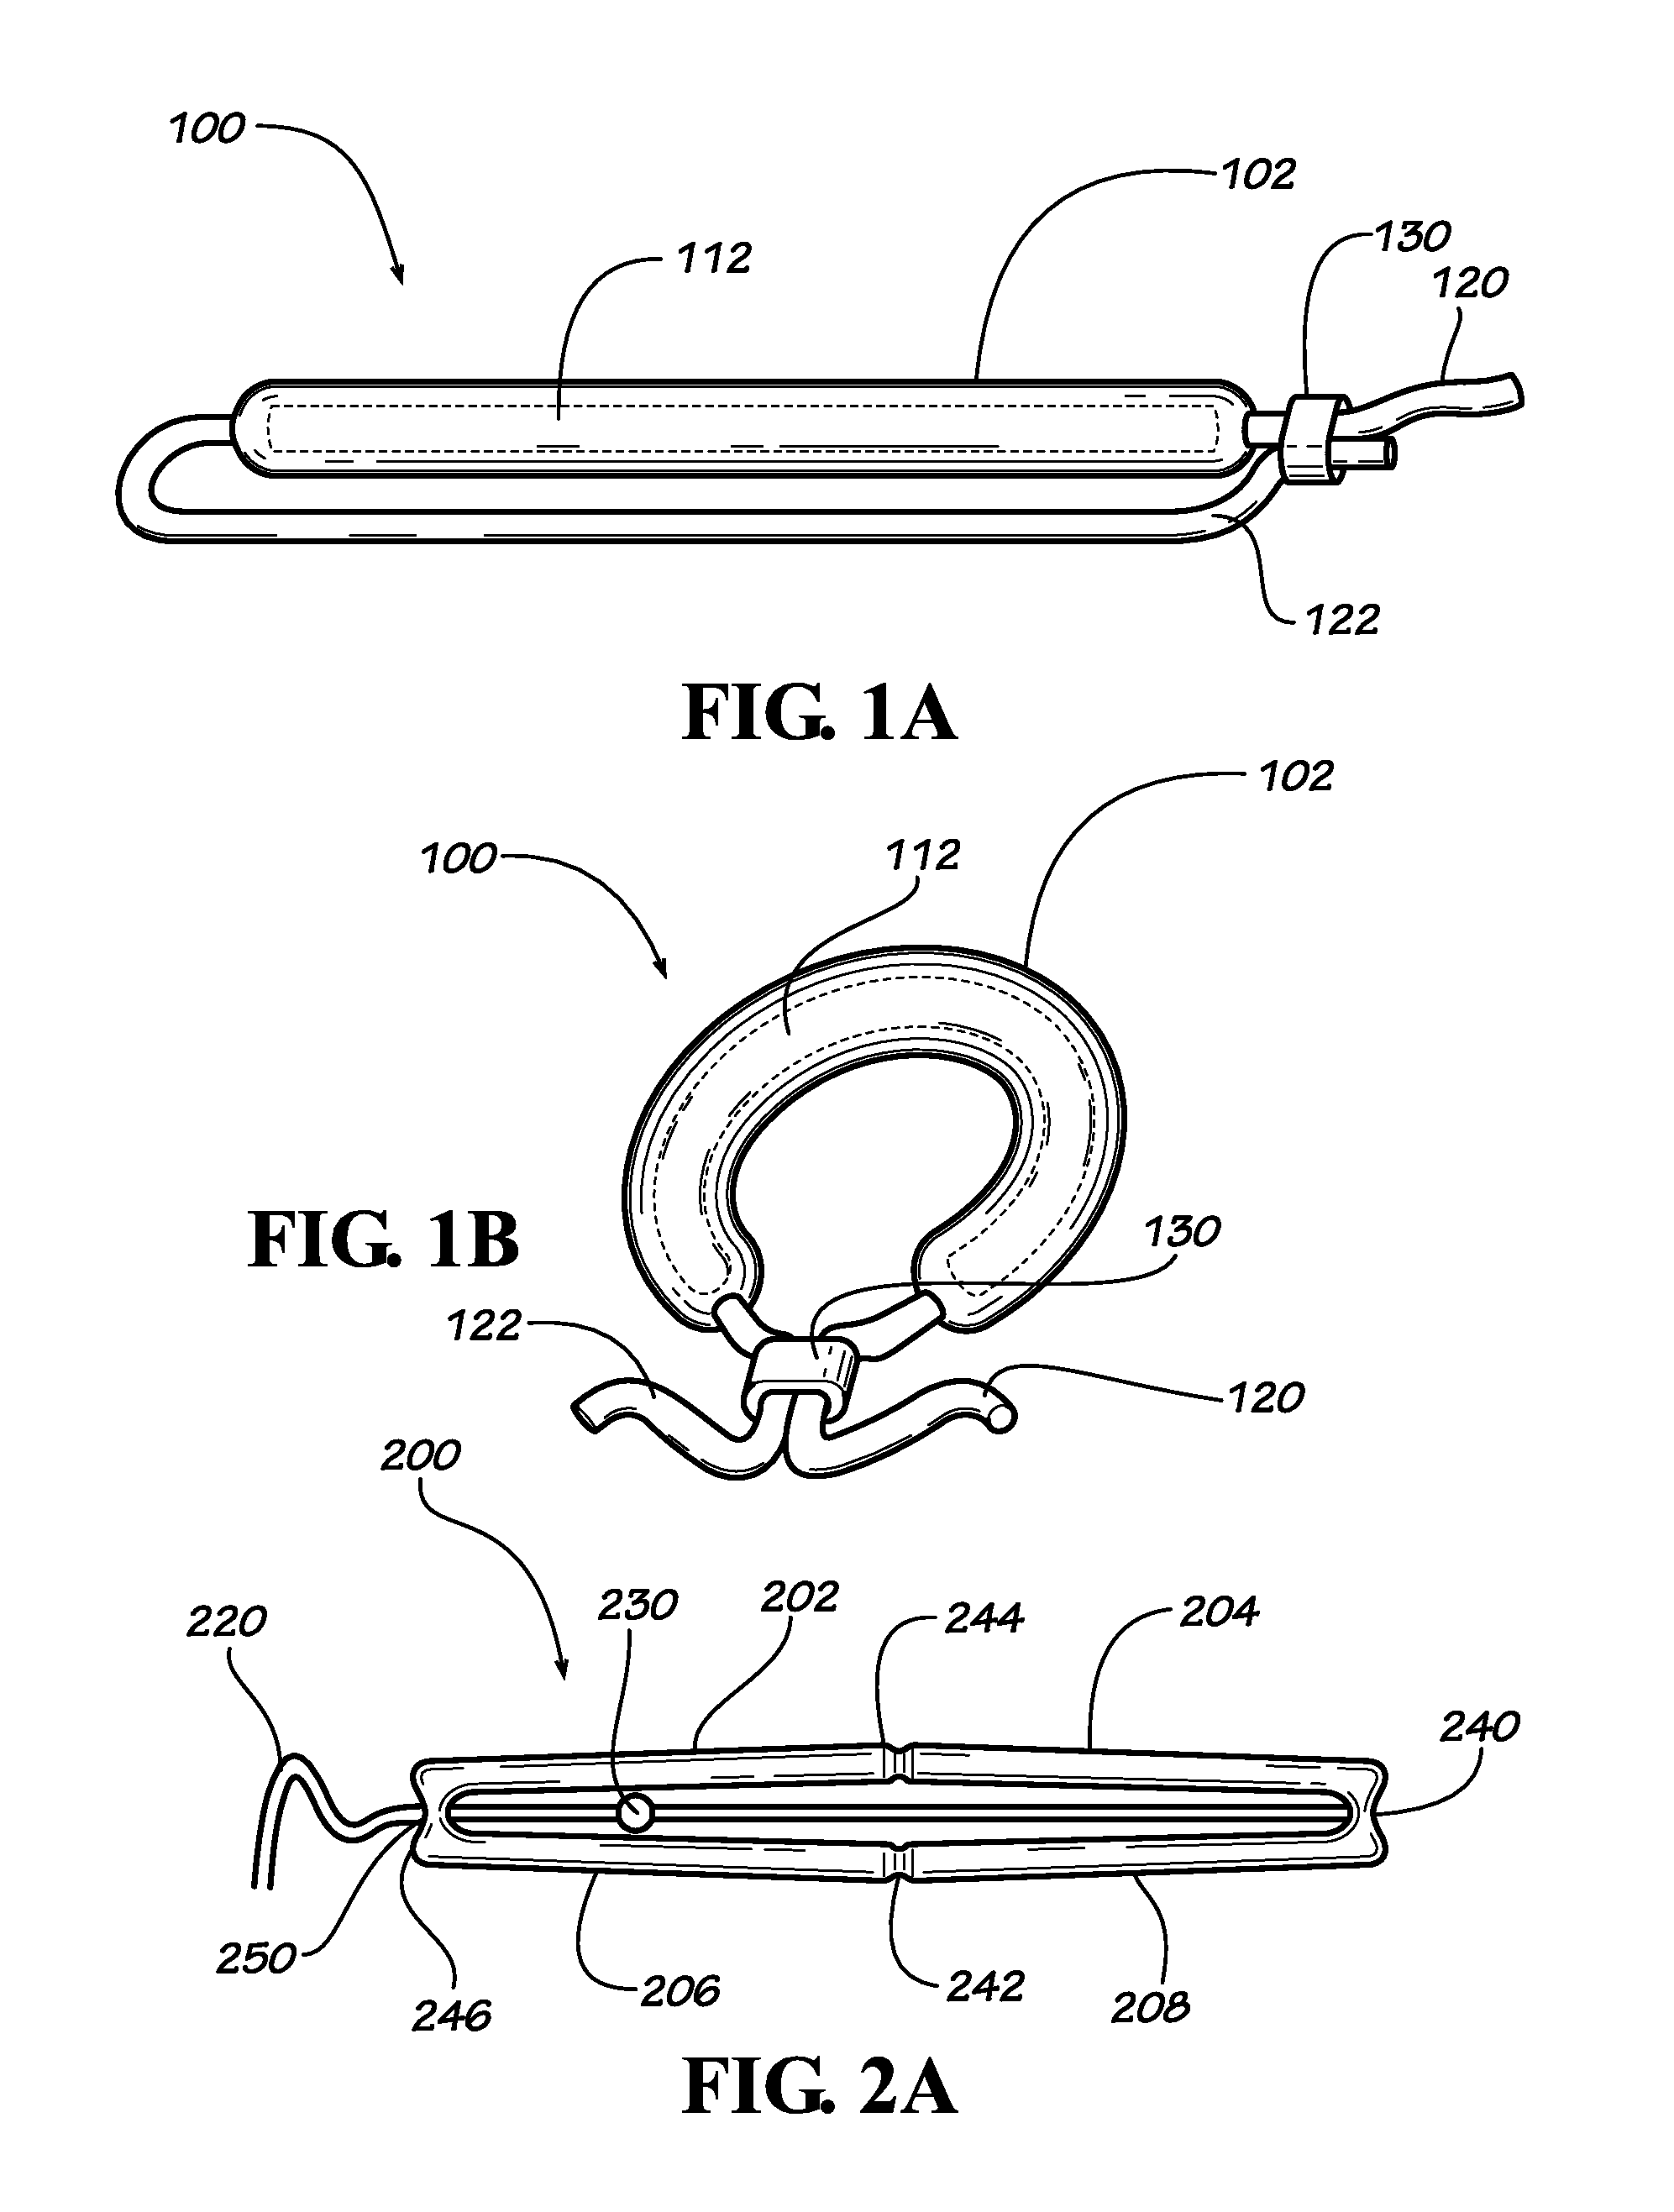 Implantable drug delivery devices for genitourinary sites